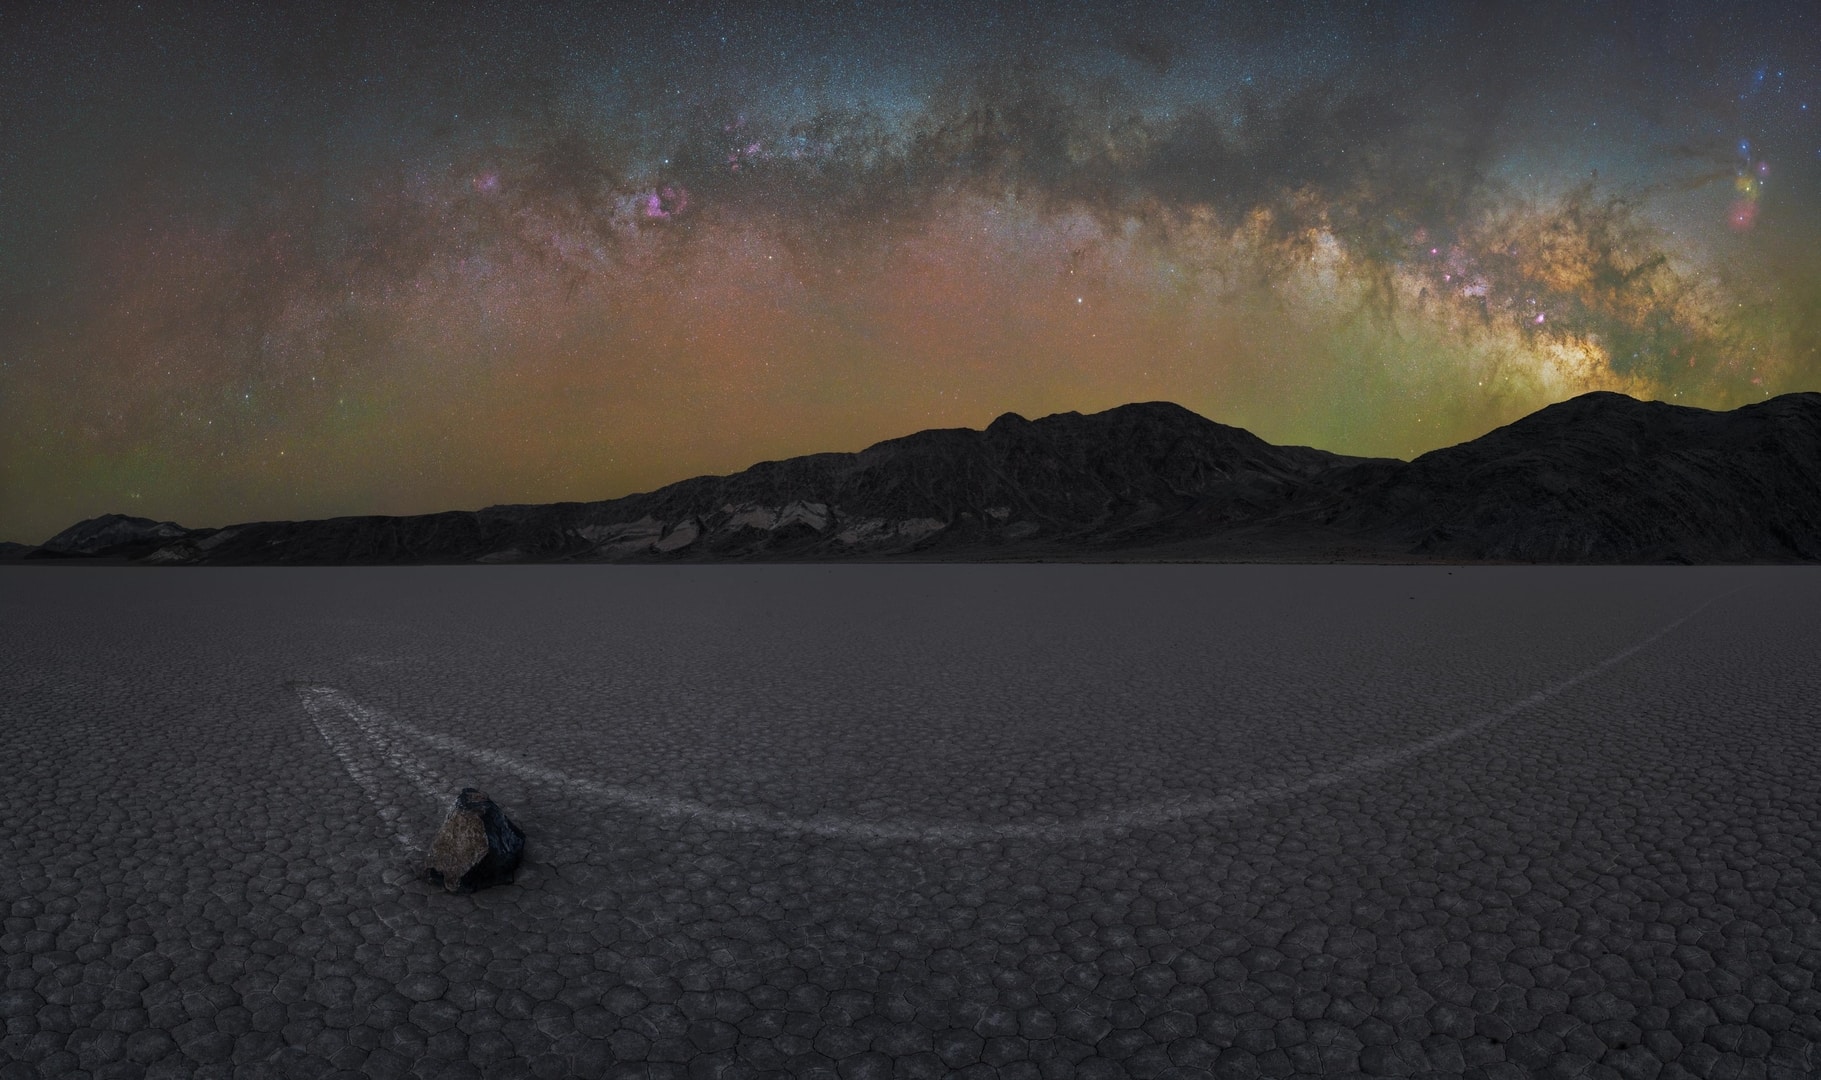 Milky Way arch over a night landscape